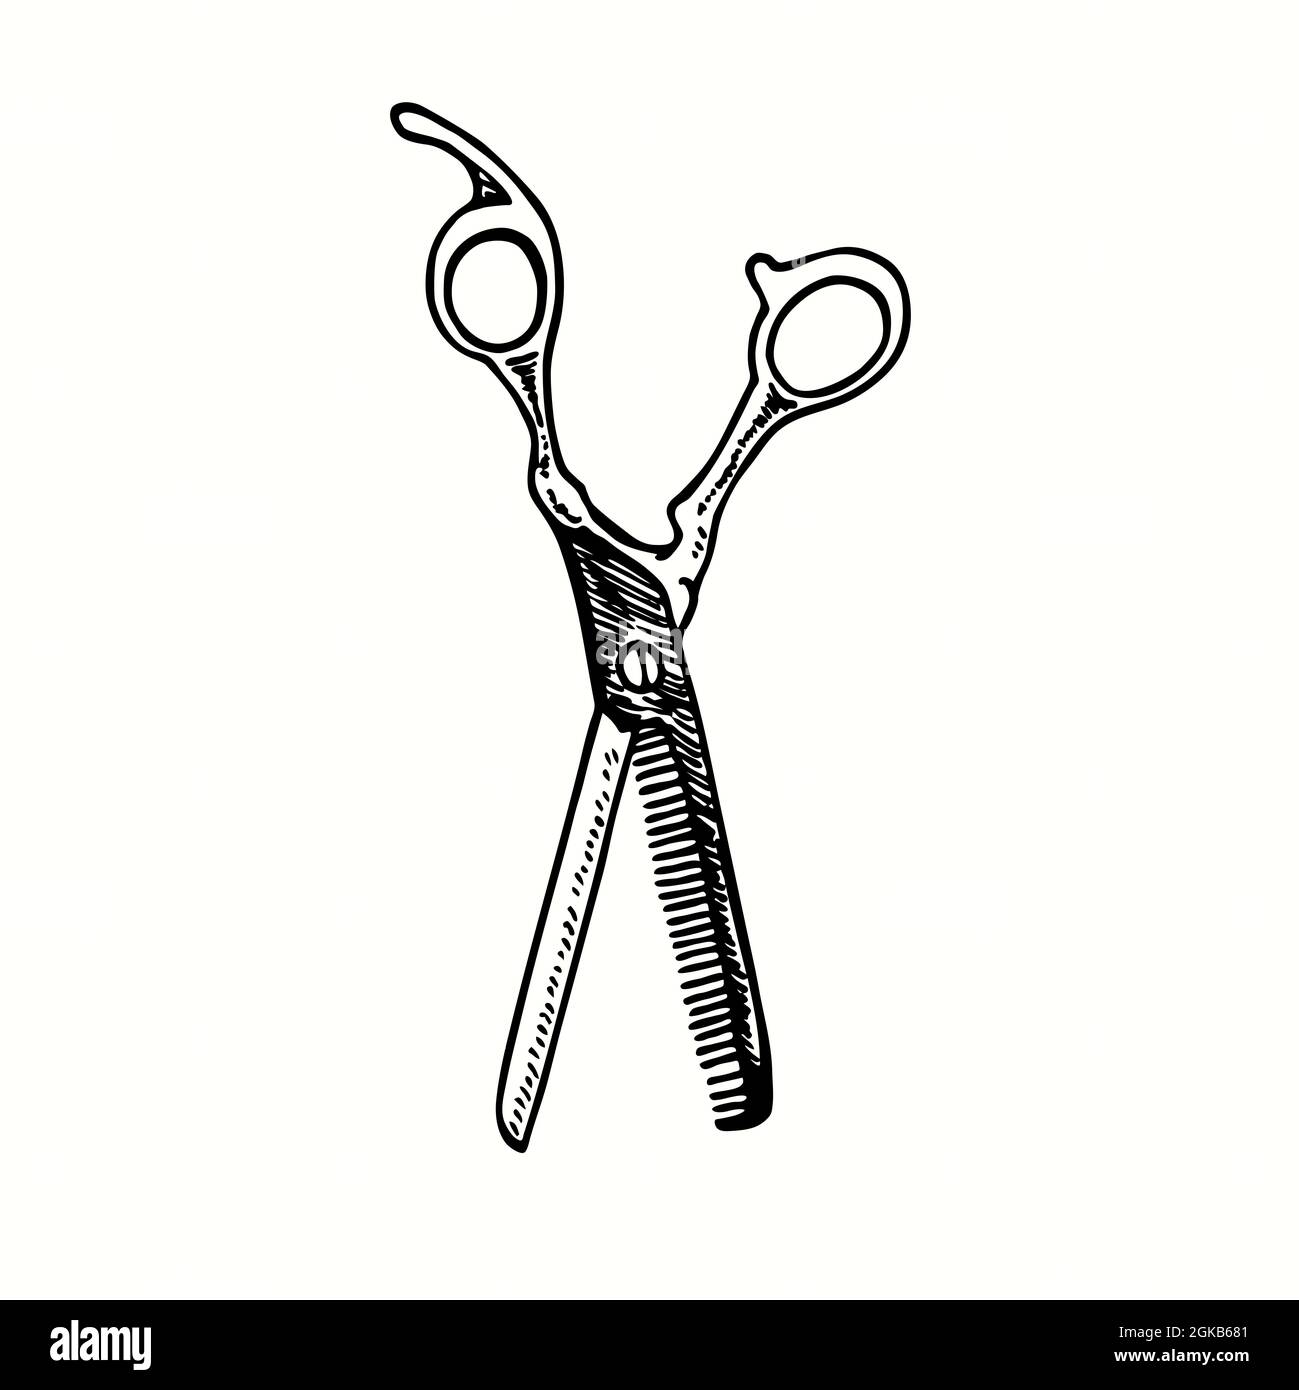 How To Draw Scissors Step By Step  Scissors Drawing Easy  YouTube